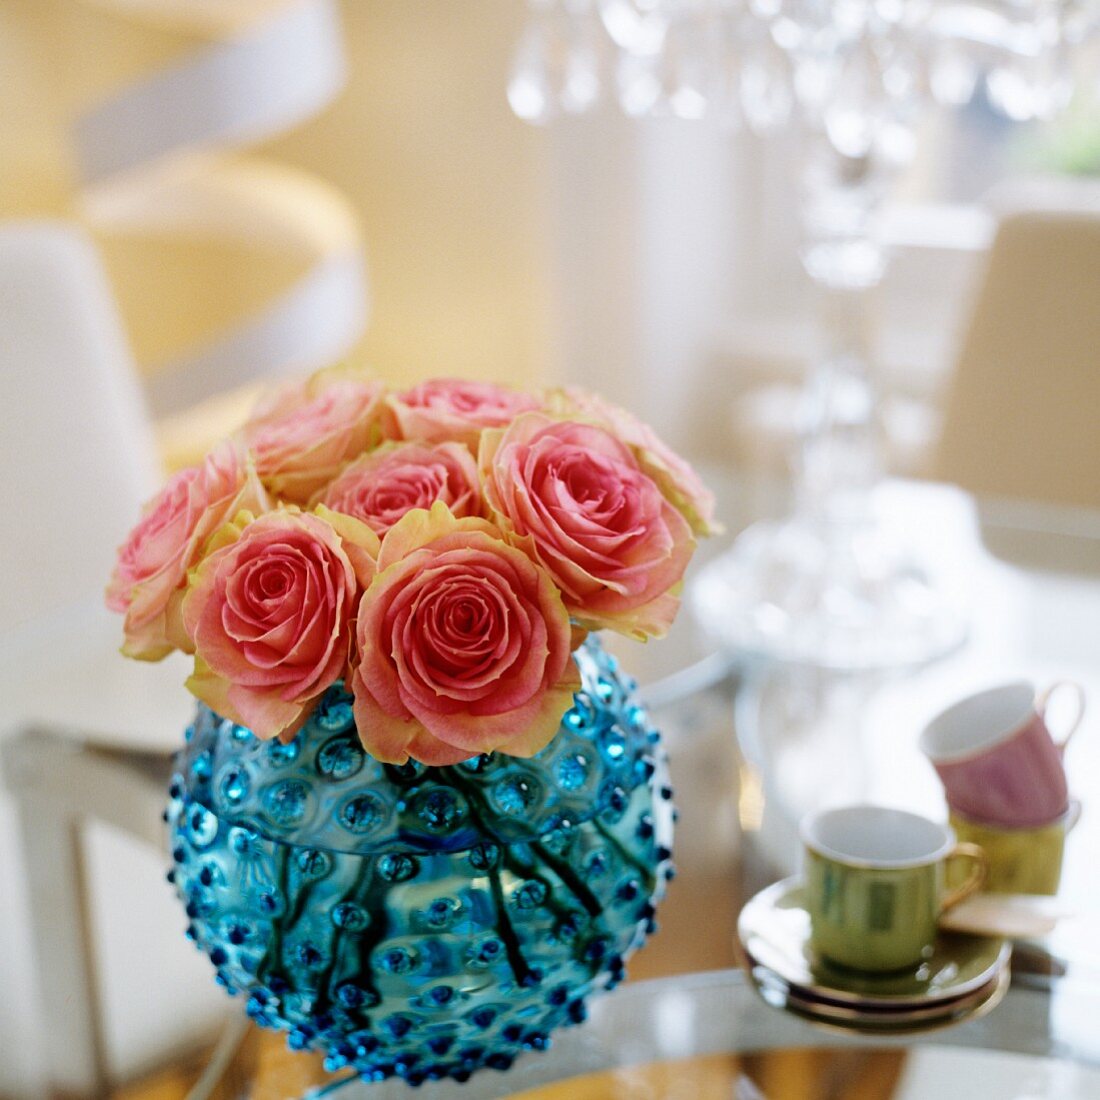 Pink roses in spherical, blue glass vase and mocha cups on table